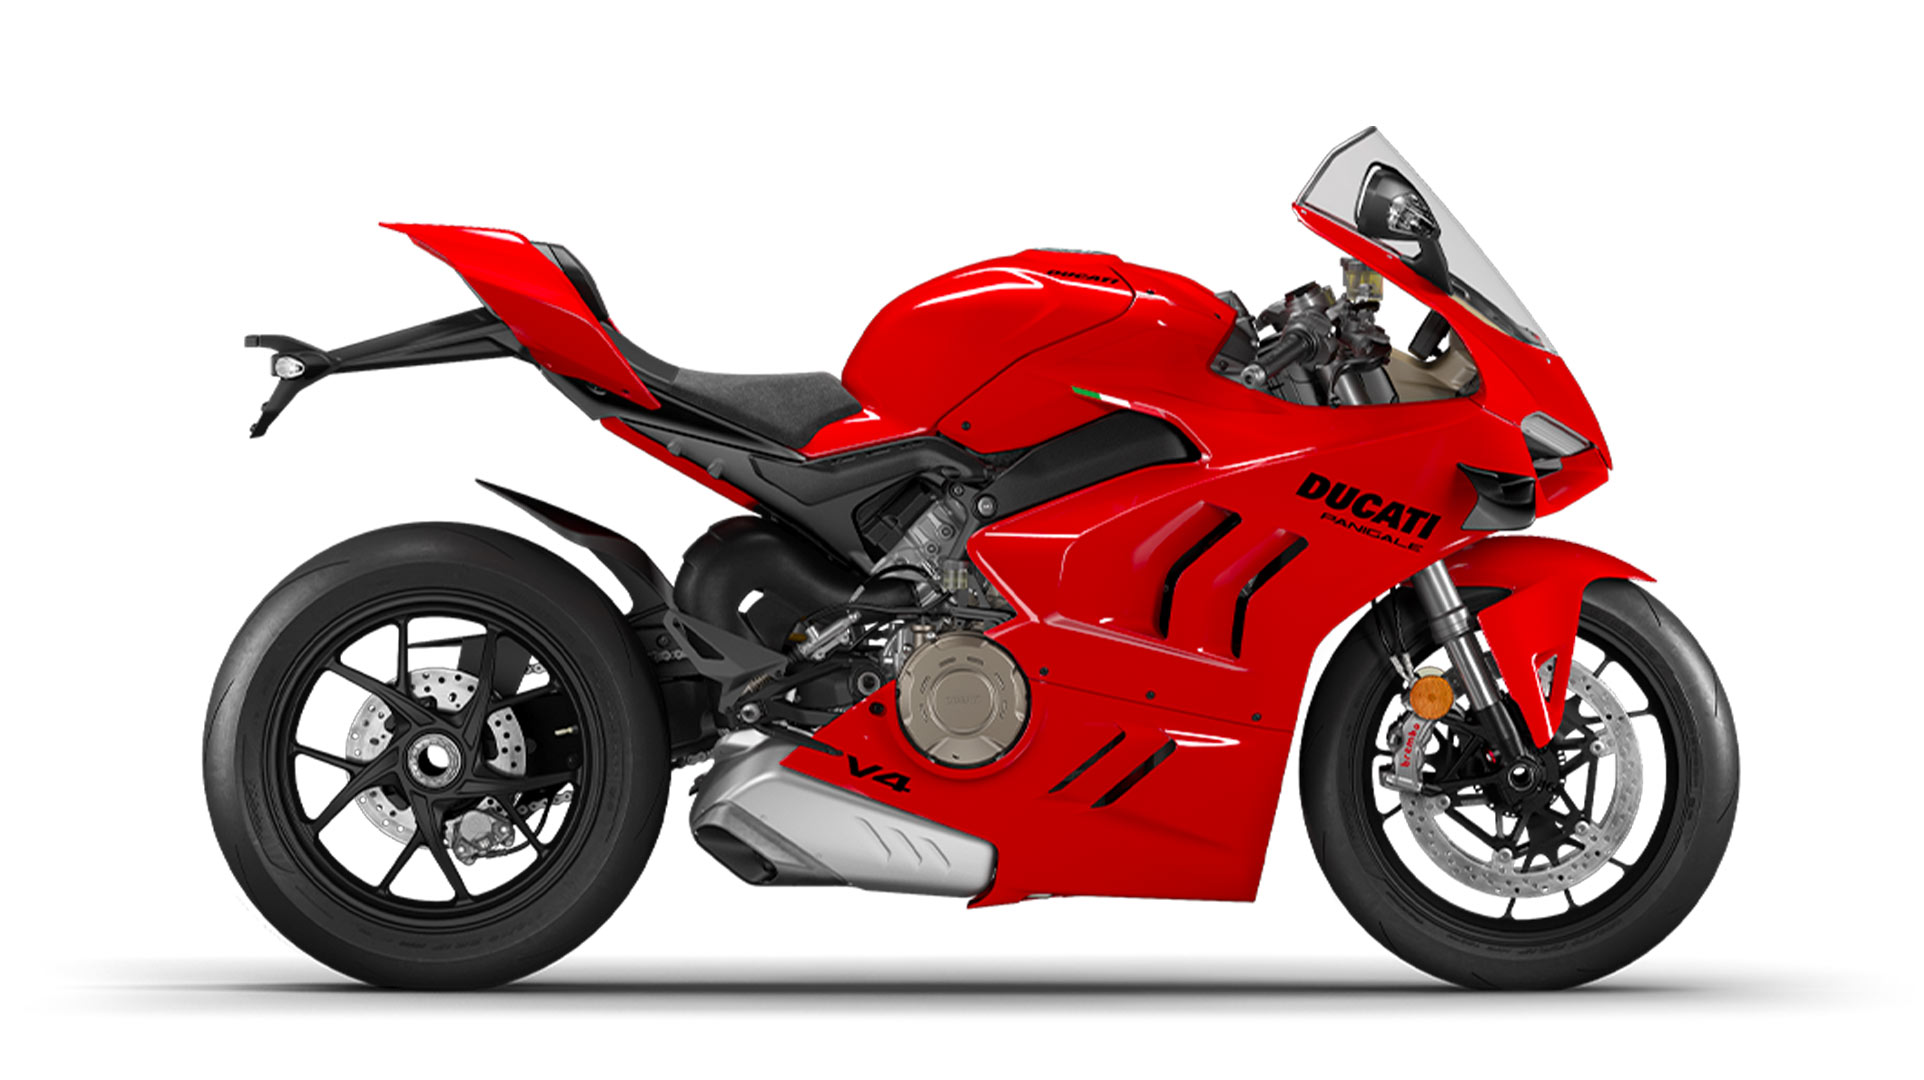 Panigale V4 side profile in red